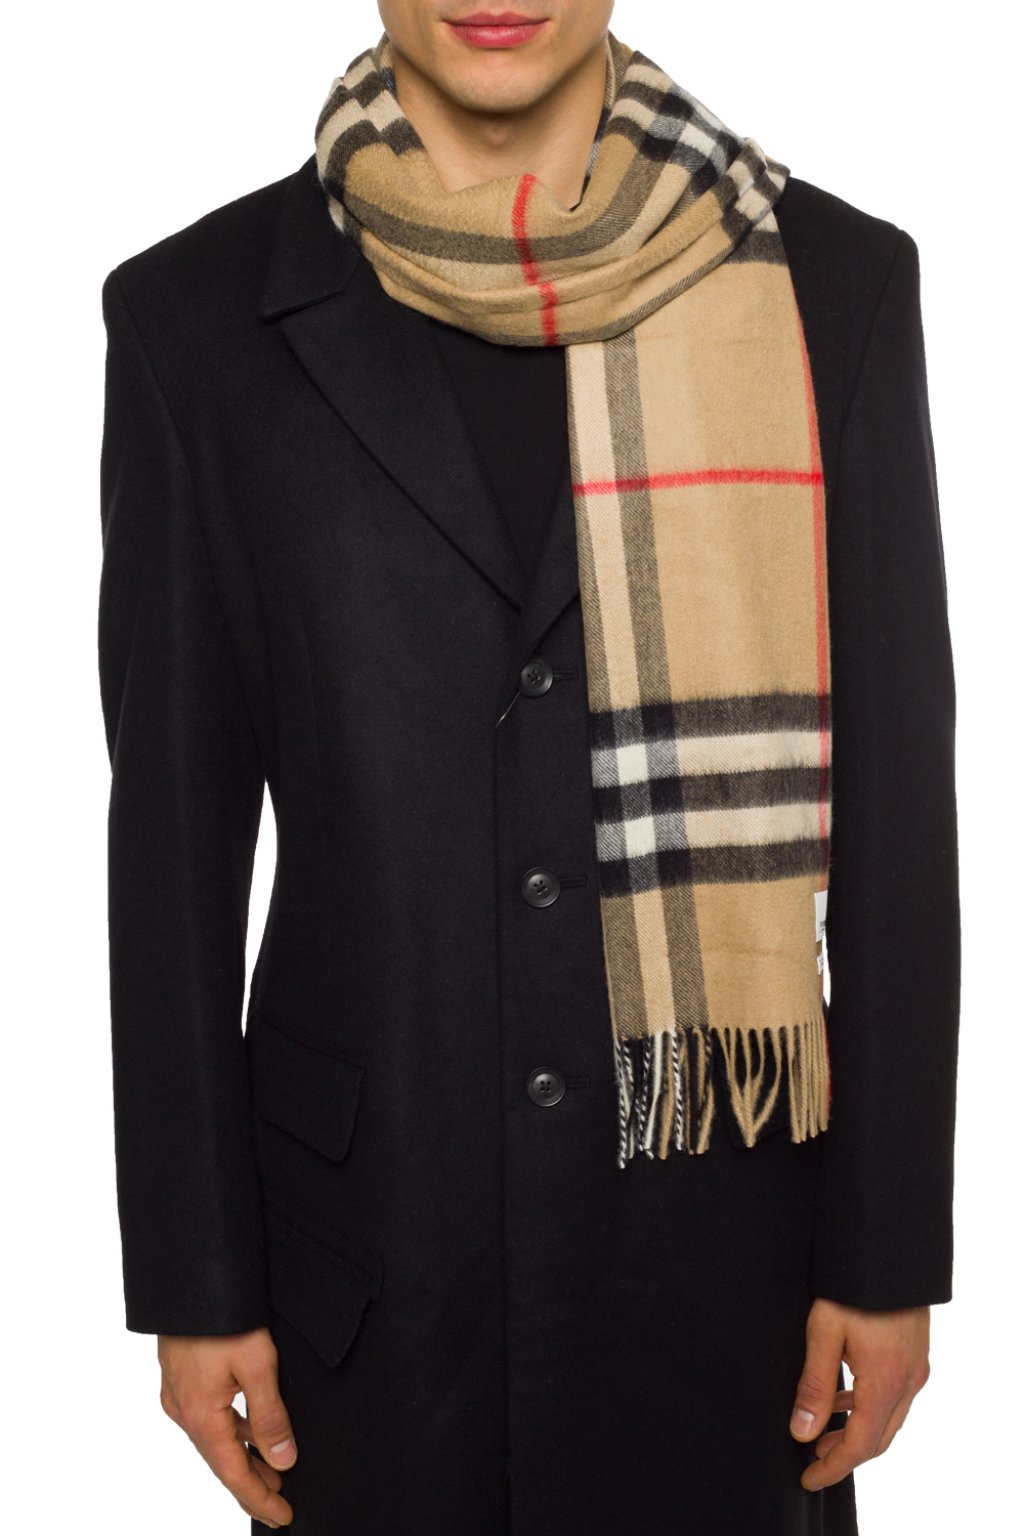 The Burberry Scarf  Burberry® Official